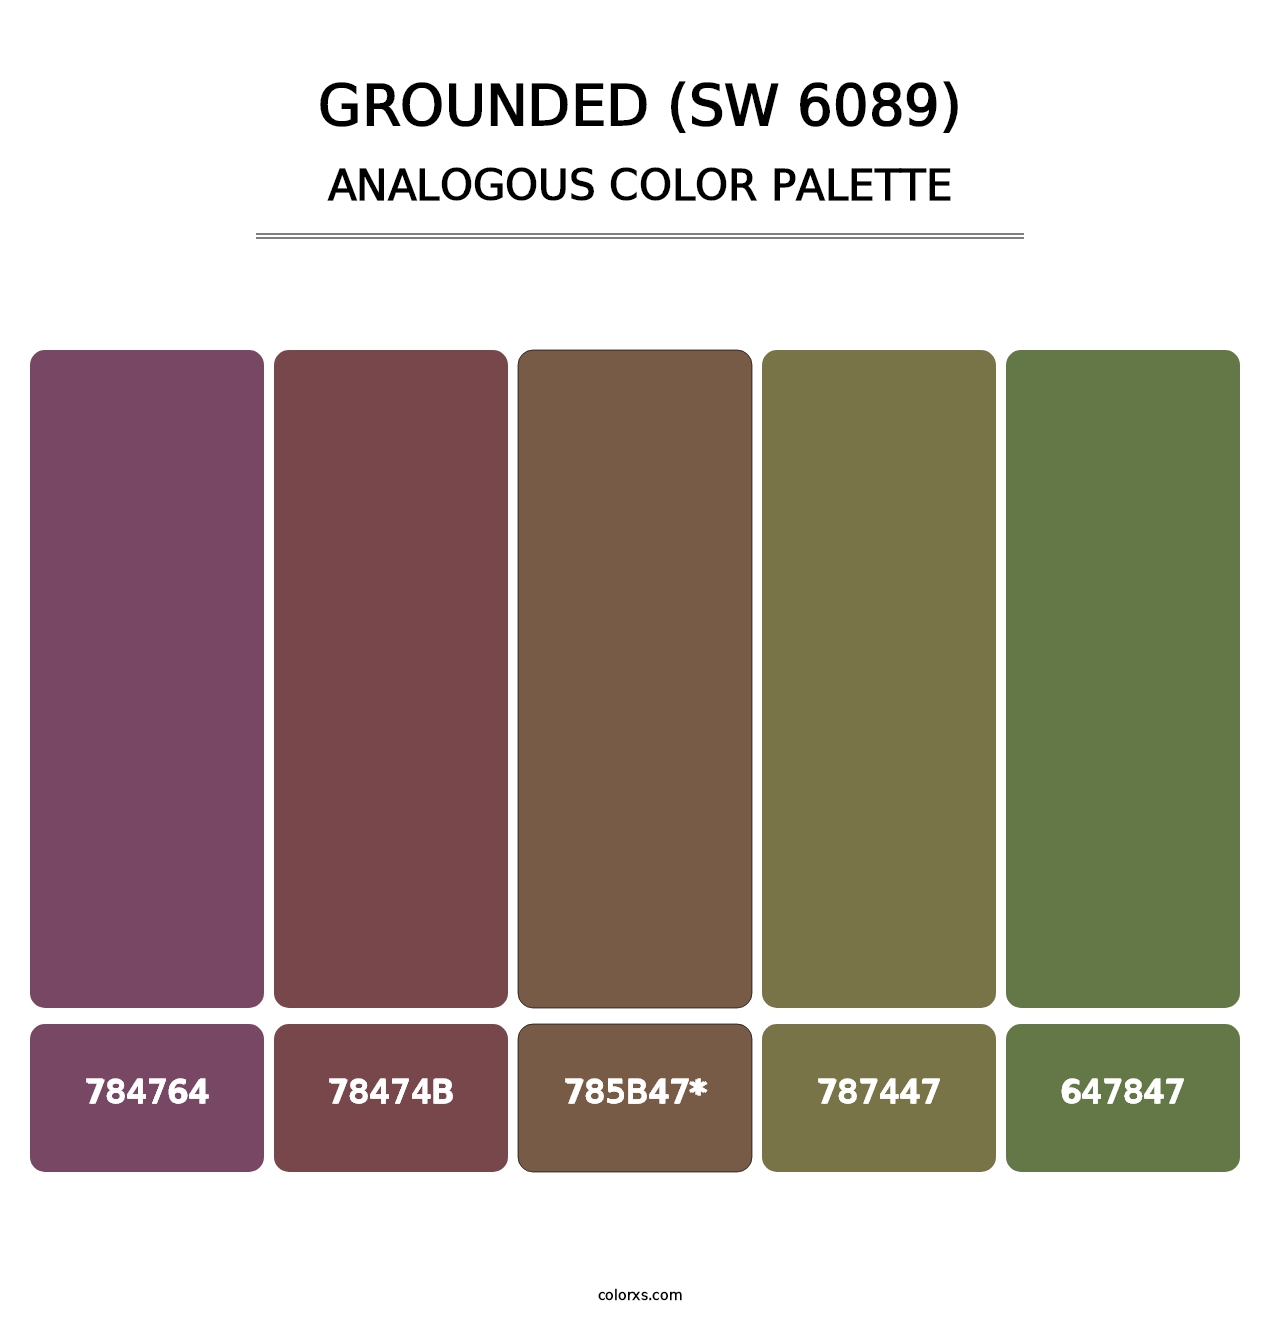 Grounded (SW 6089) - Analogous Color Palette